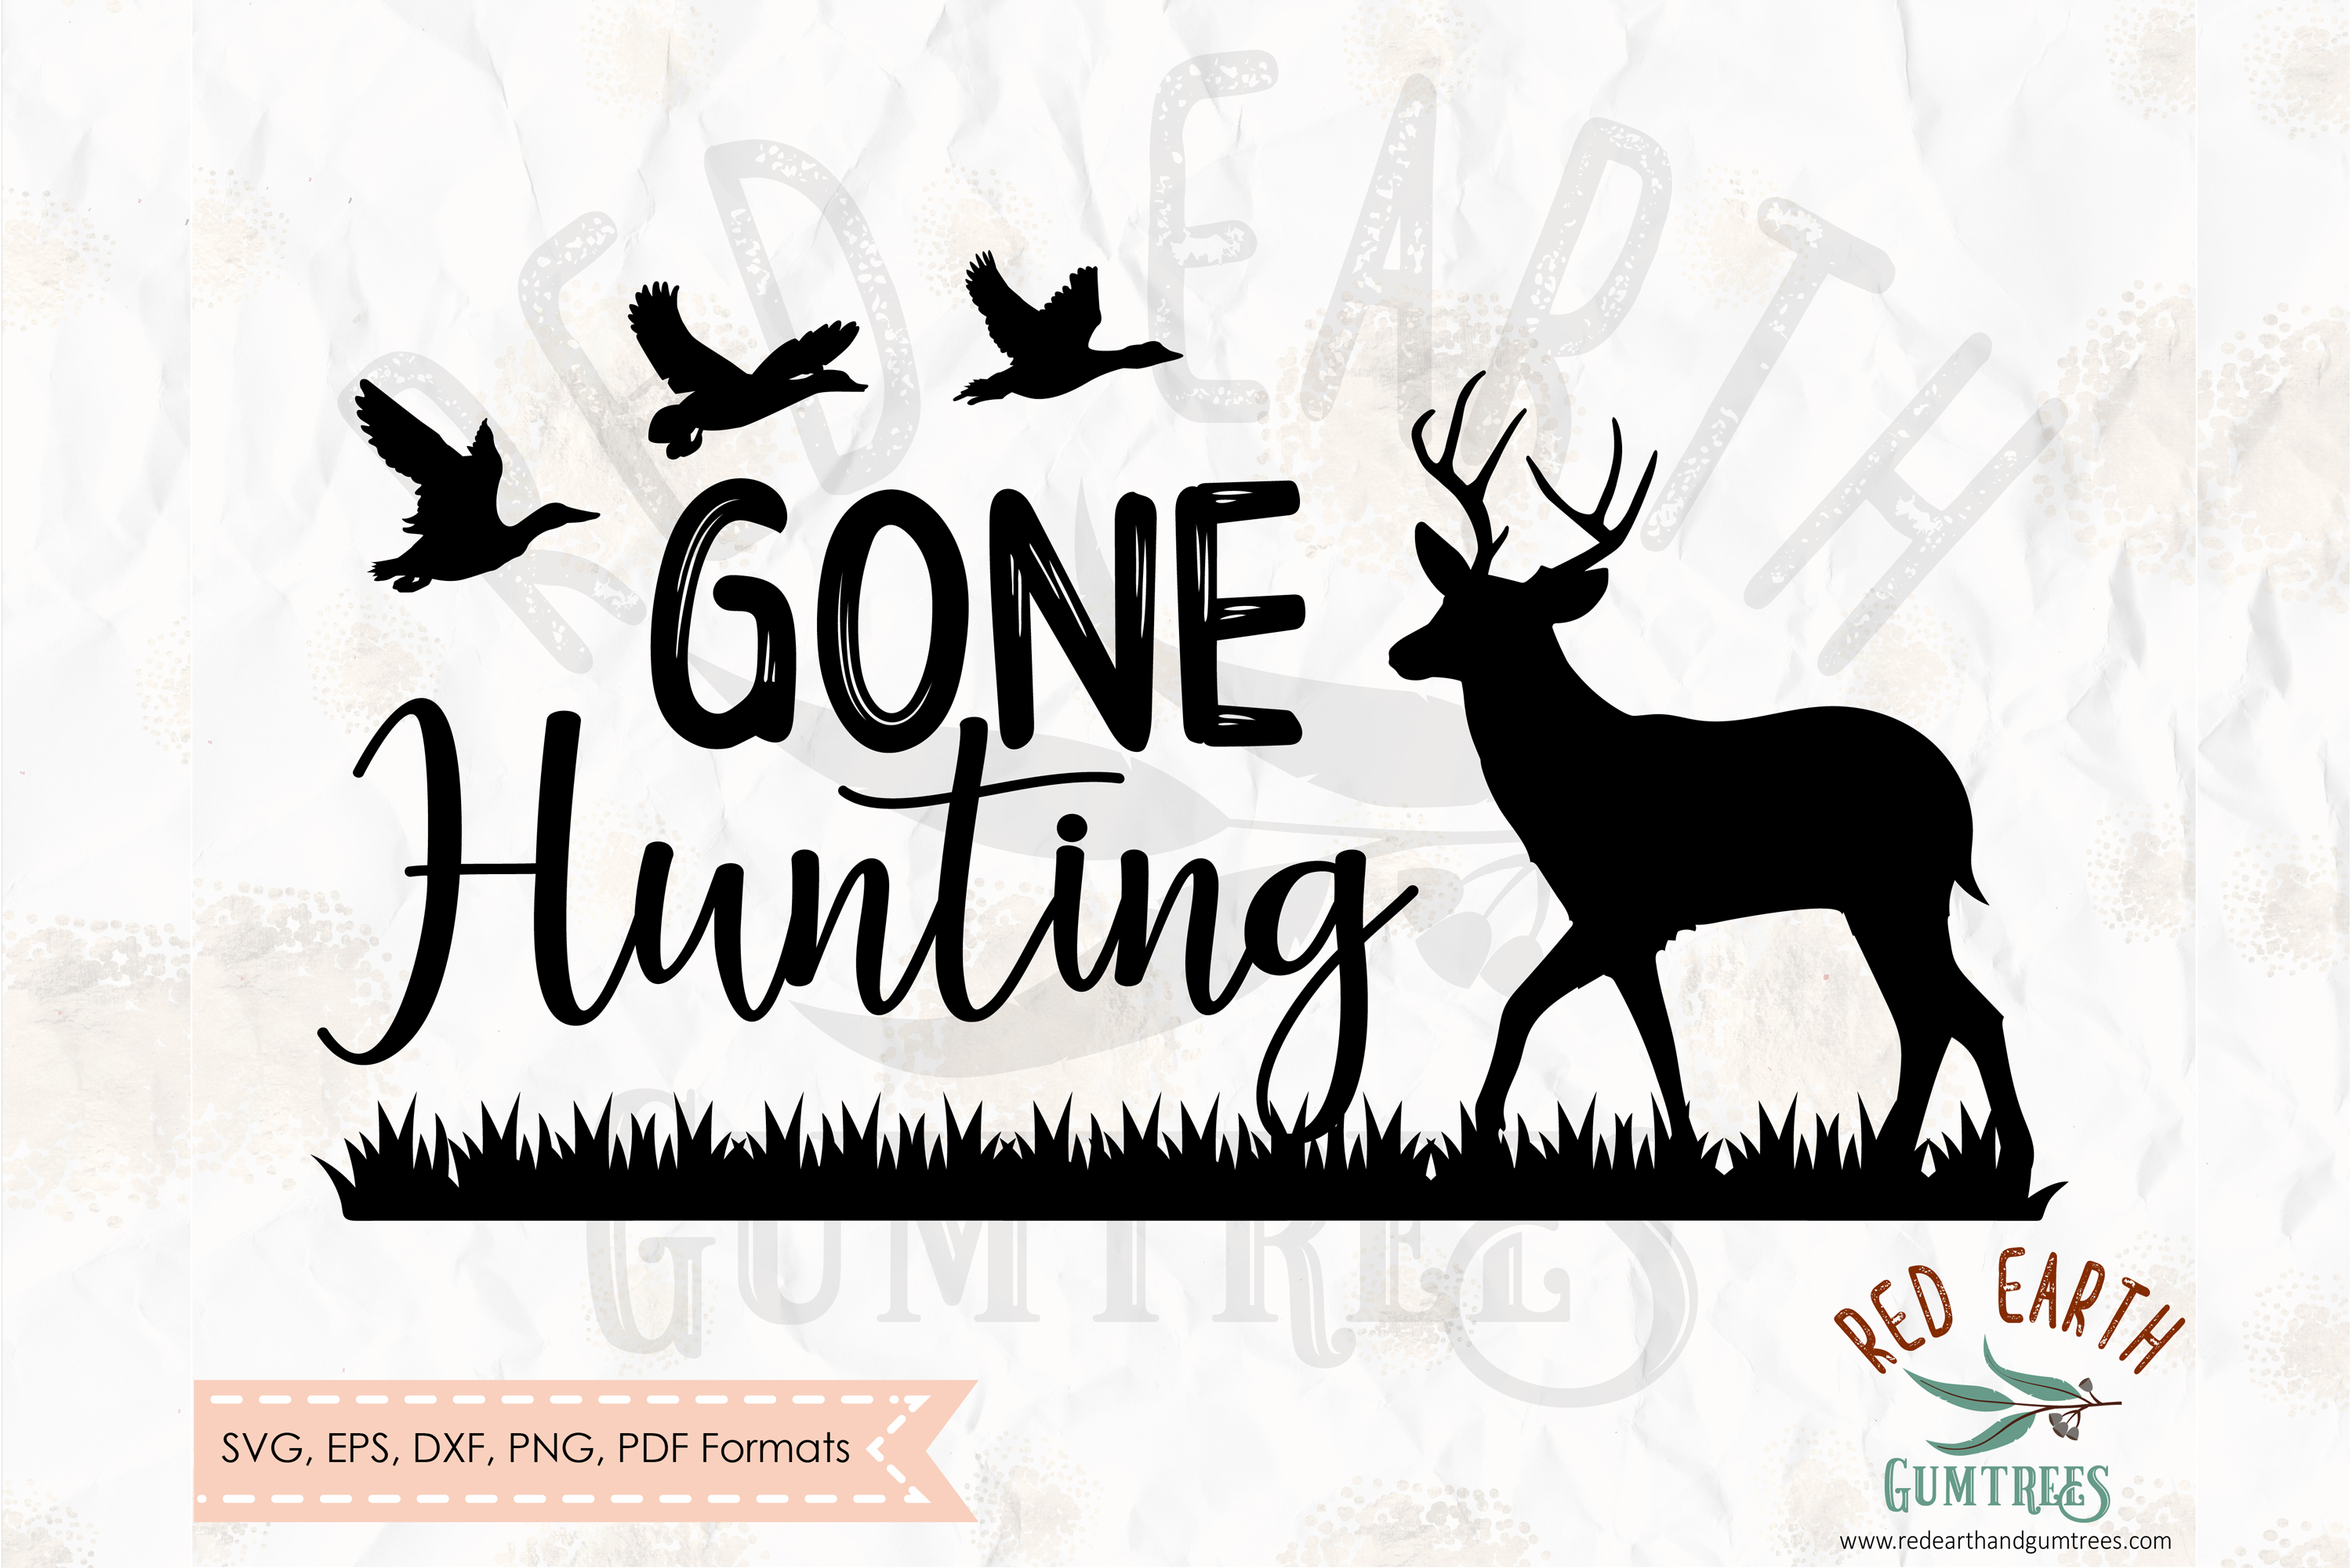 Gone hunting silhouette decal in SVG,DXF,PNG,EPS,PDF formats